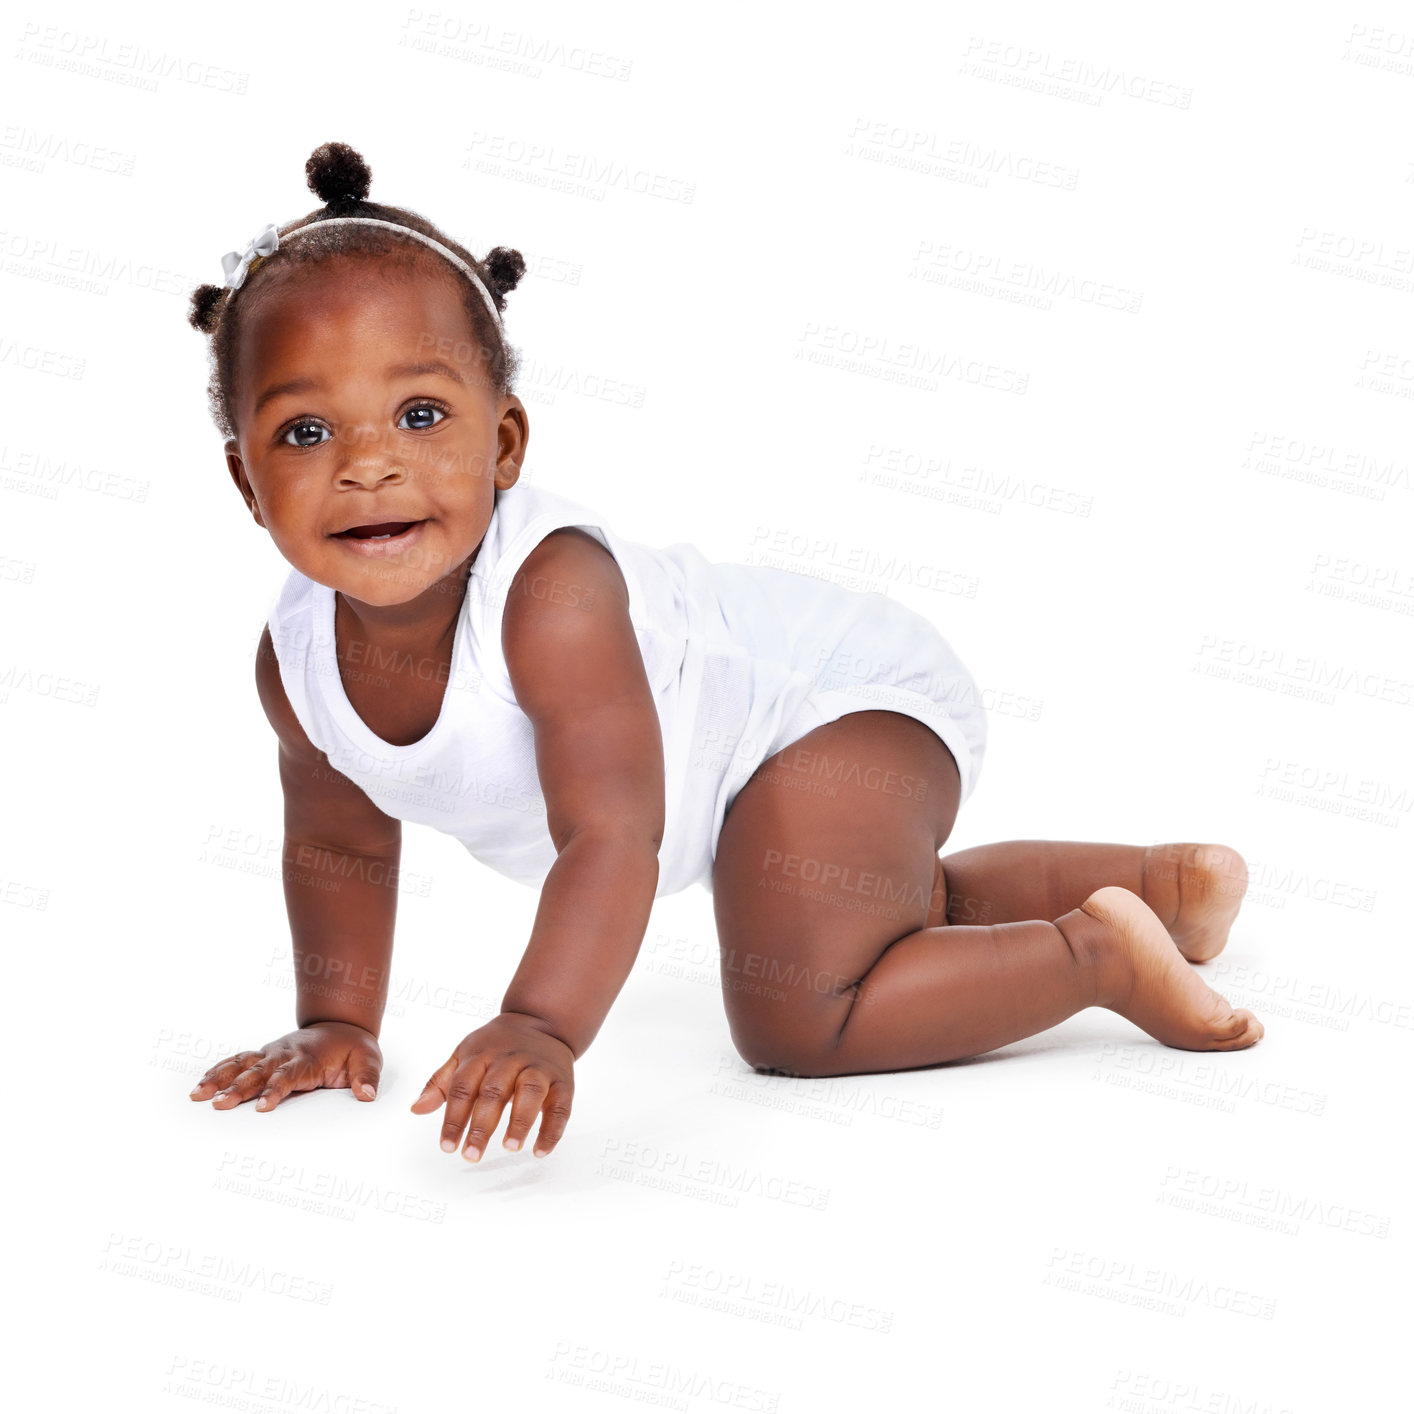 Buy stock photo Smile, portrait and African girl baby isolated on white background with playful happiness, crawling and growth. Learning to crawl, play and development, happy face of black child on studio backdrop.